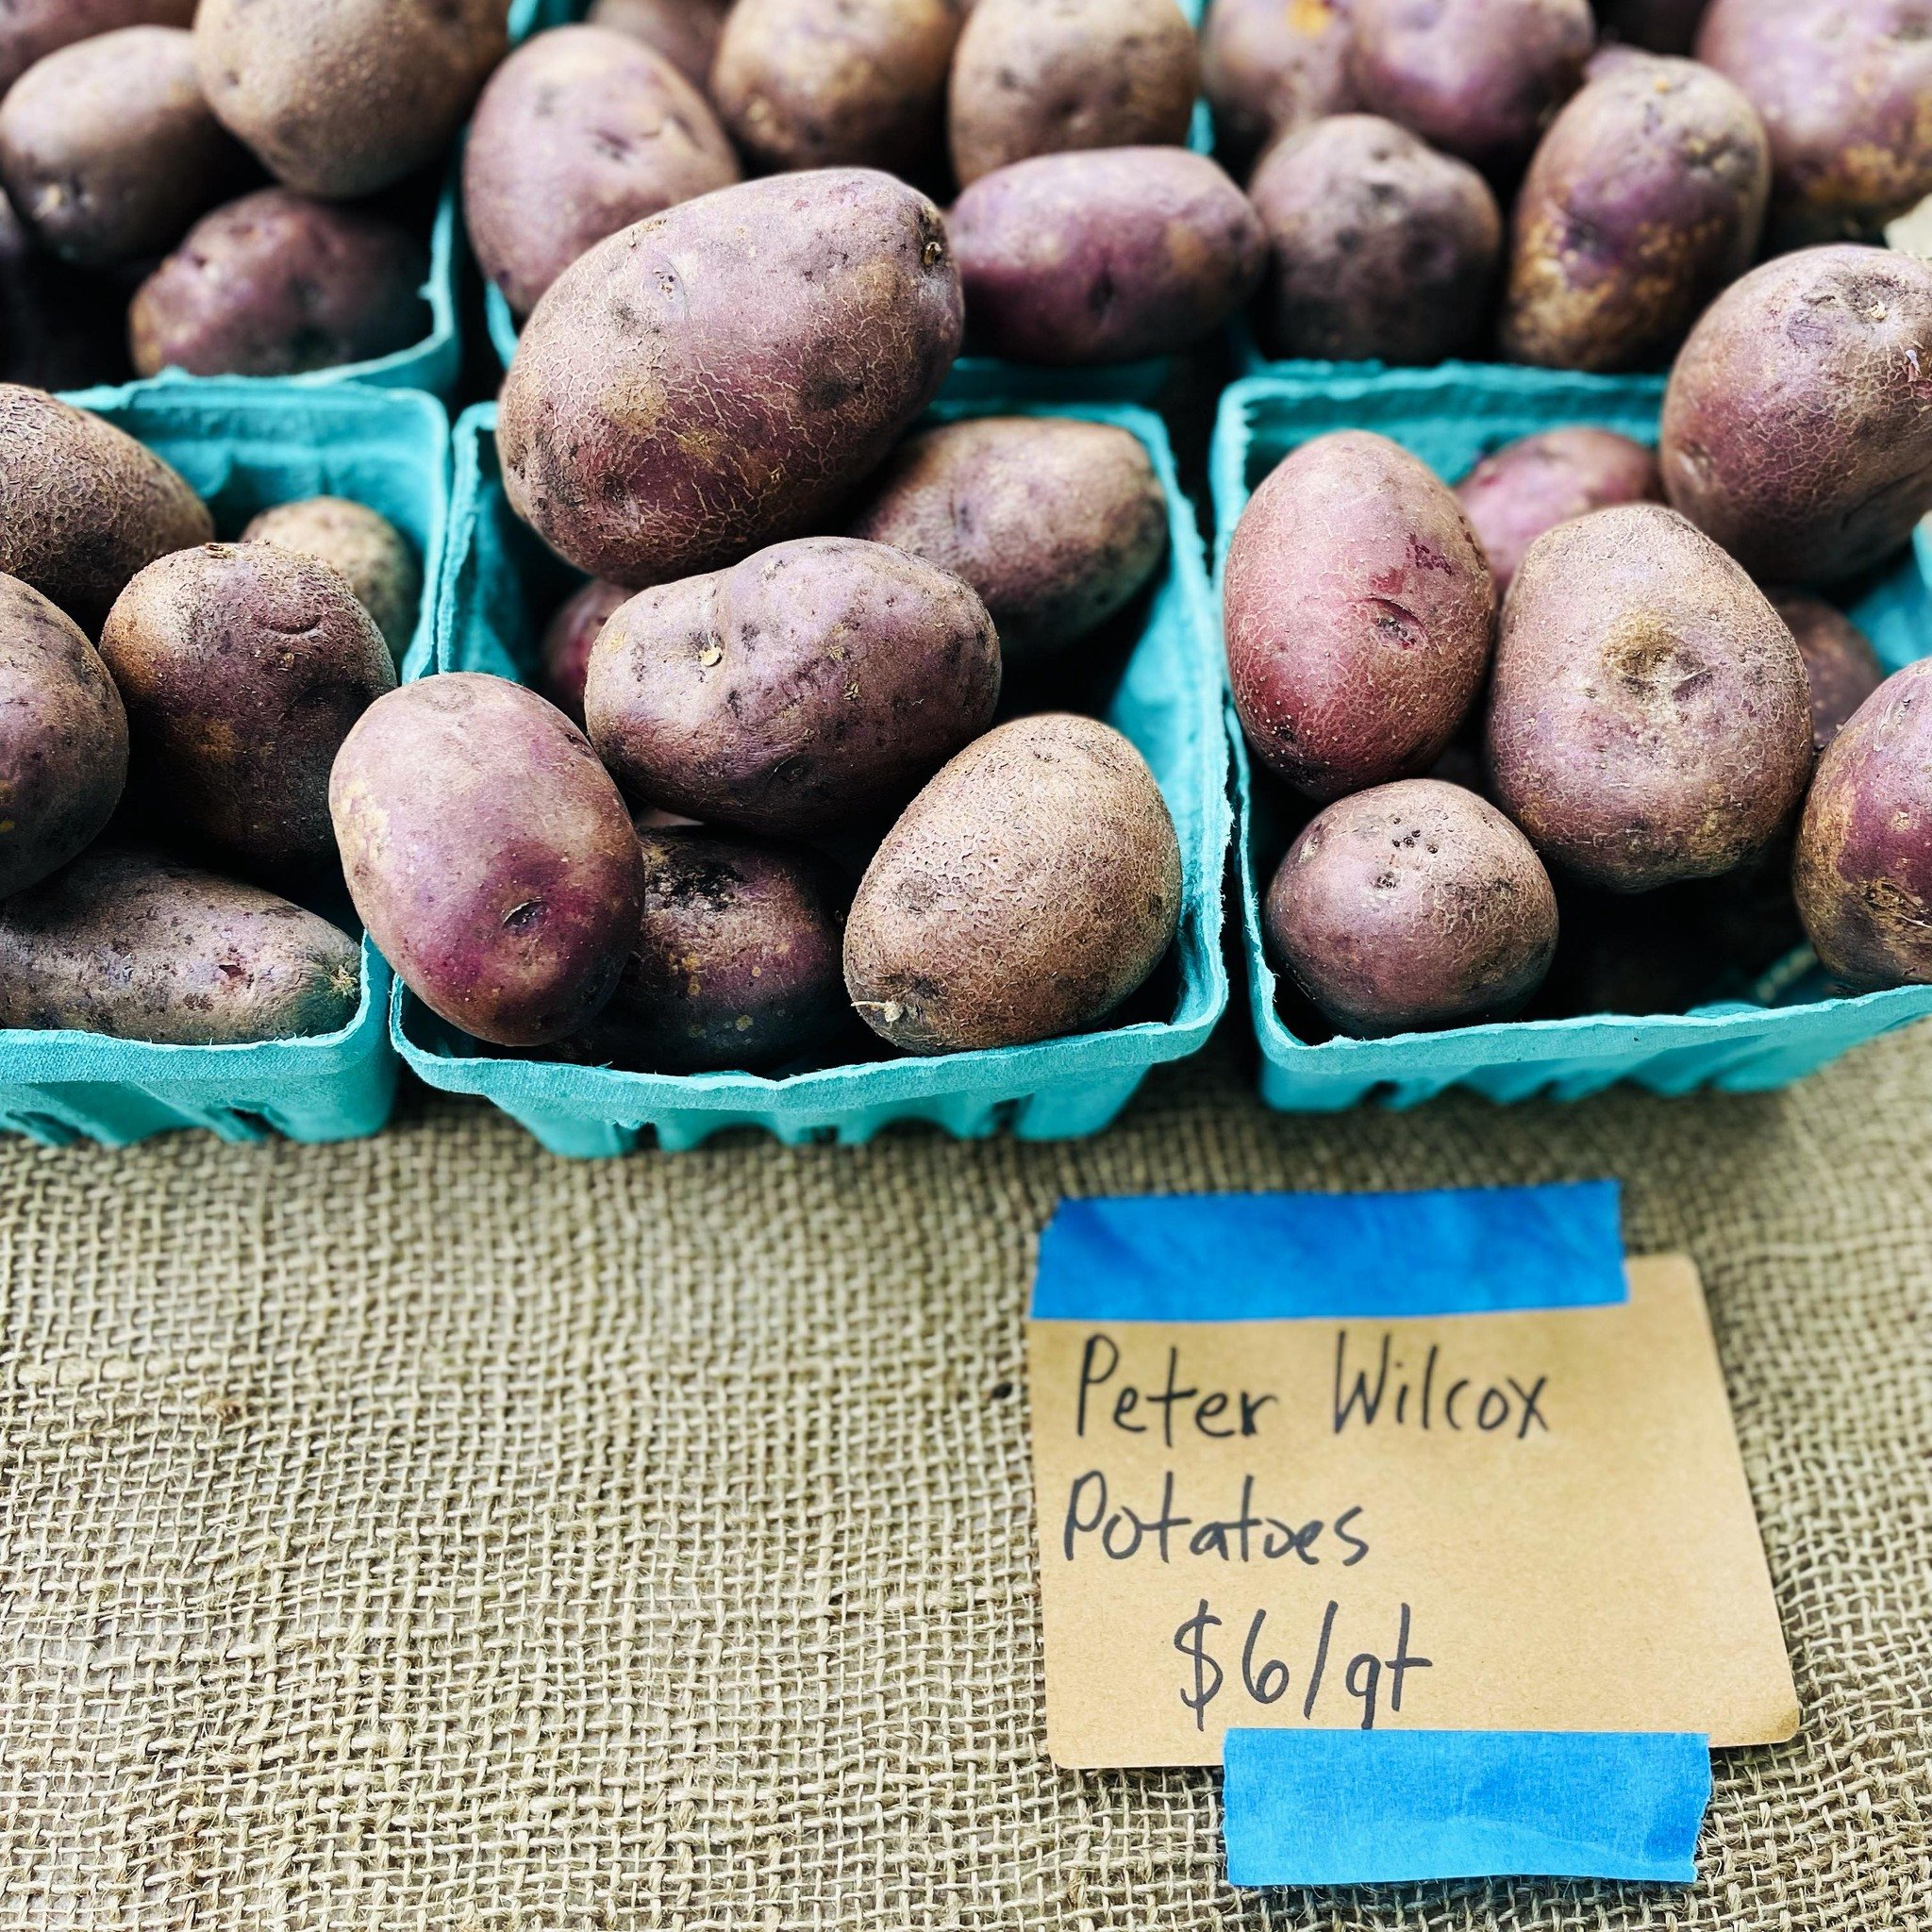 From the @nytimes and on the menu at the @beaconfarmersmarket via @fieldandlarder 

&ldquo;The new Peter Wilcox is a potato for New York Fashion Week, cloaked in deep purple and lined in gold. It&rsquo;s as appealing to the palate as it is on the pla